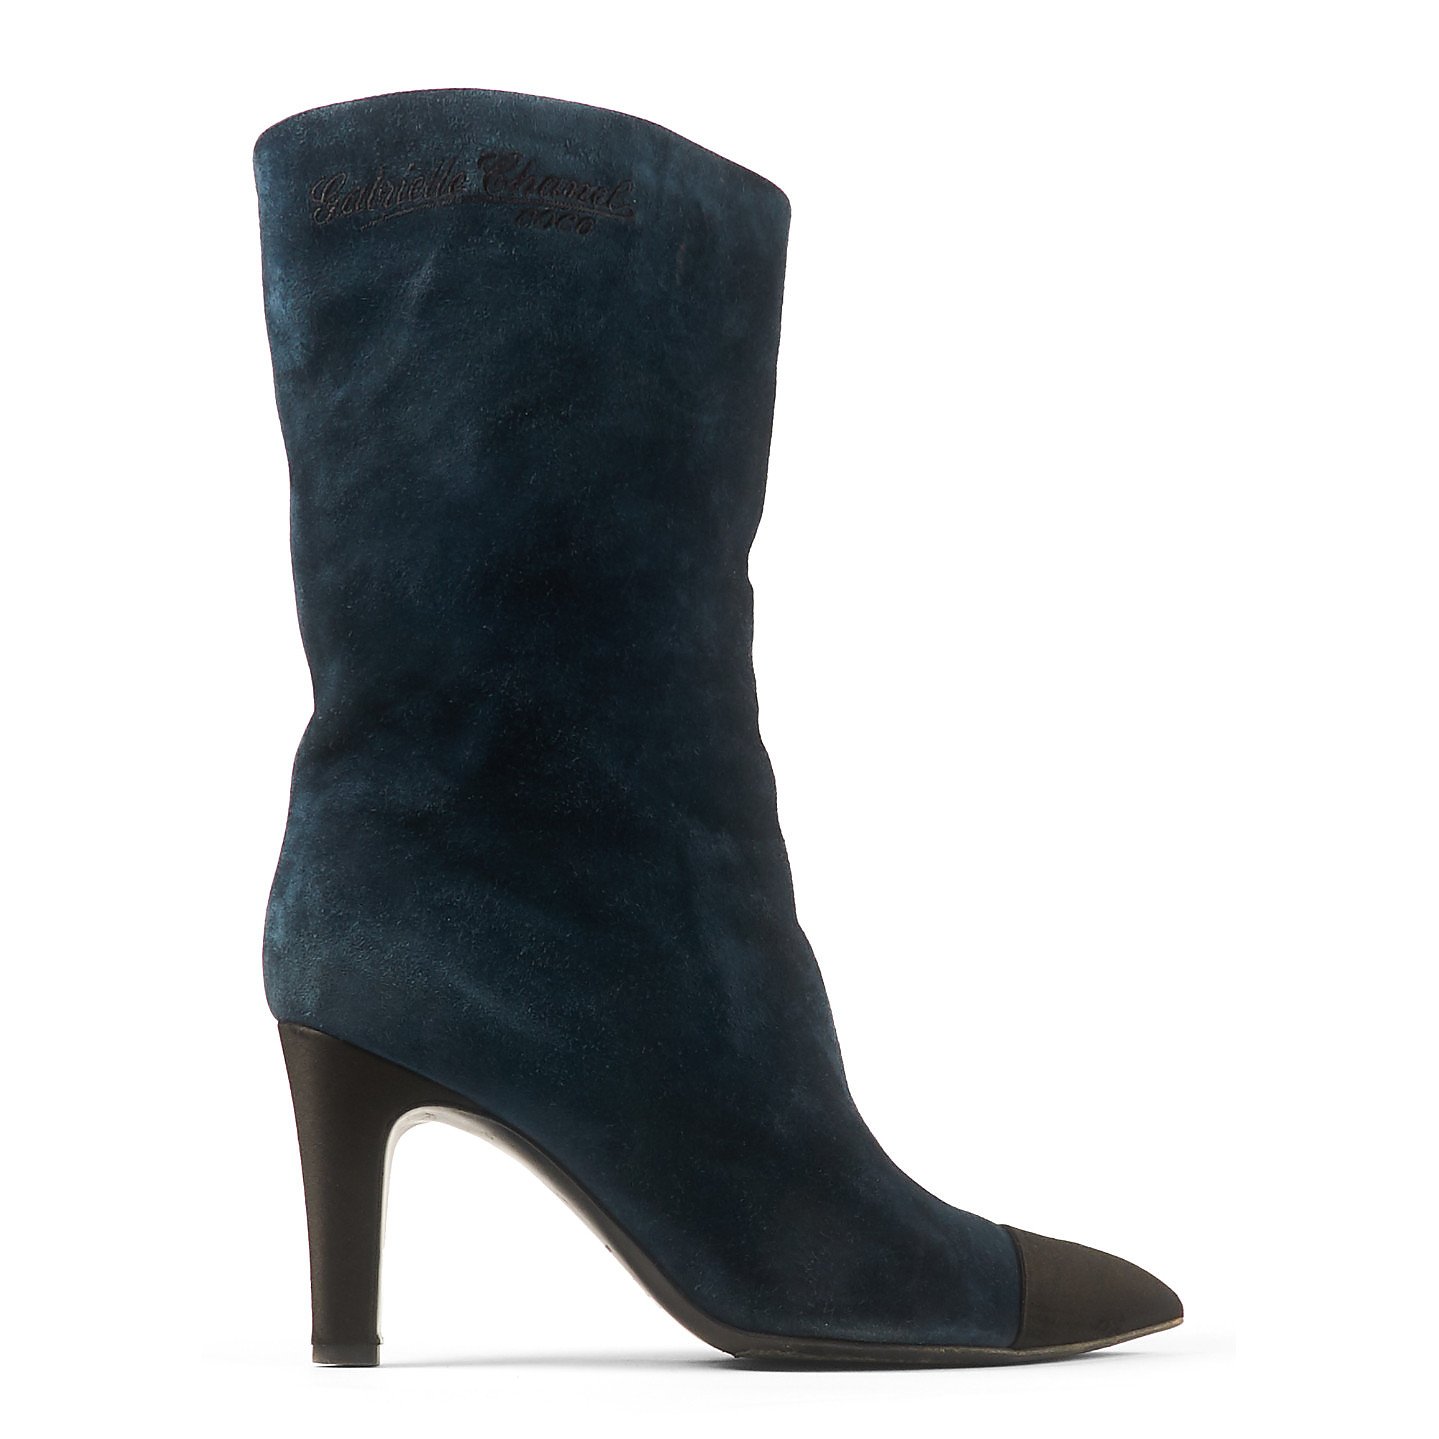 Rent or Buy CHANEL Suede High Heel Boots from MyWardrobeHQ.com